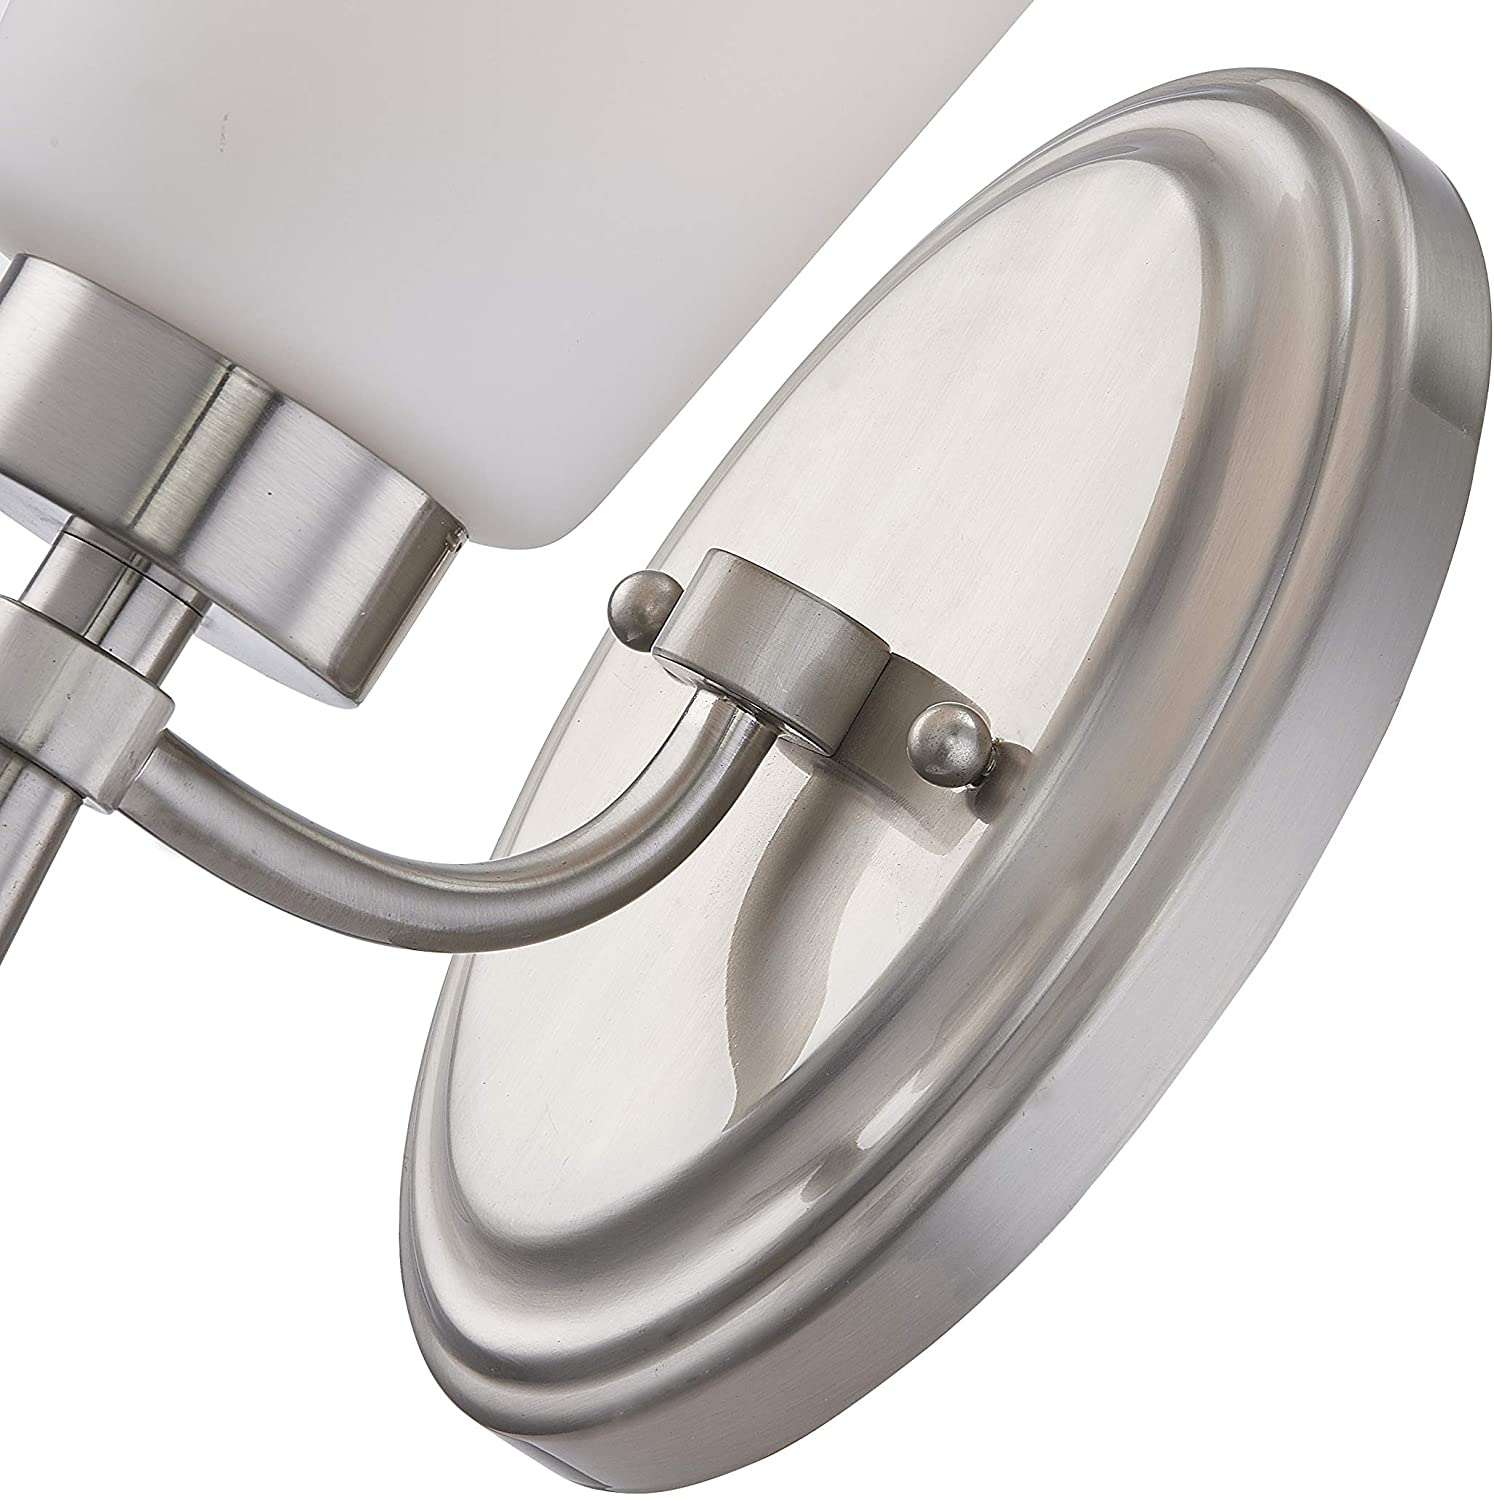 Gruenlich 1-Light Wall Sconce, Bathroom Vanity Lighting Fixture, E26 Base 100W Max, Metal Housing with Glass, Nickel Finish